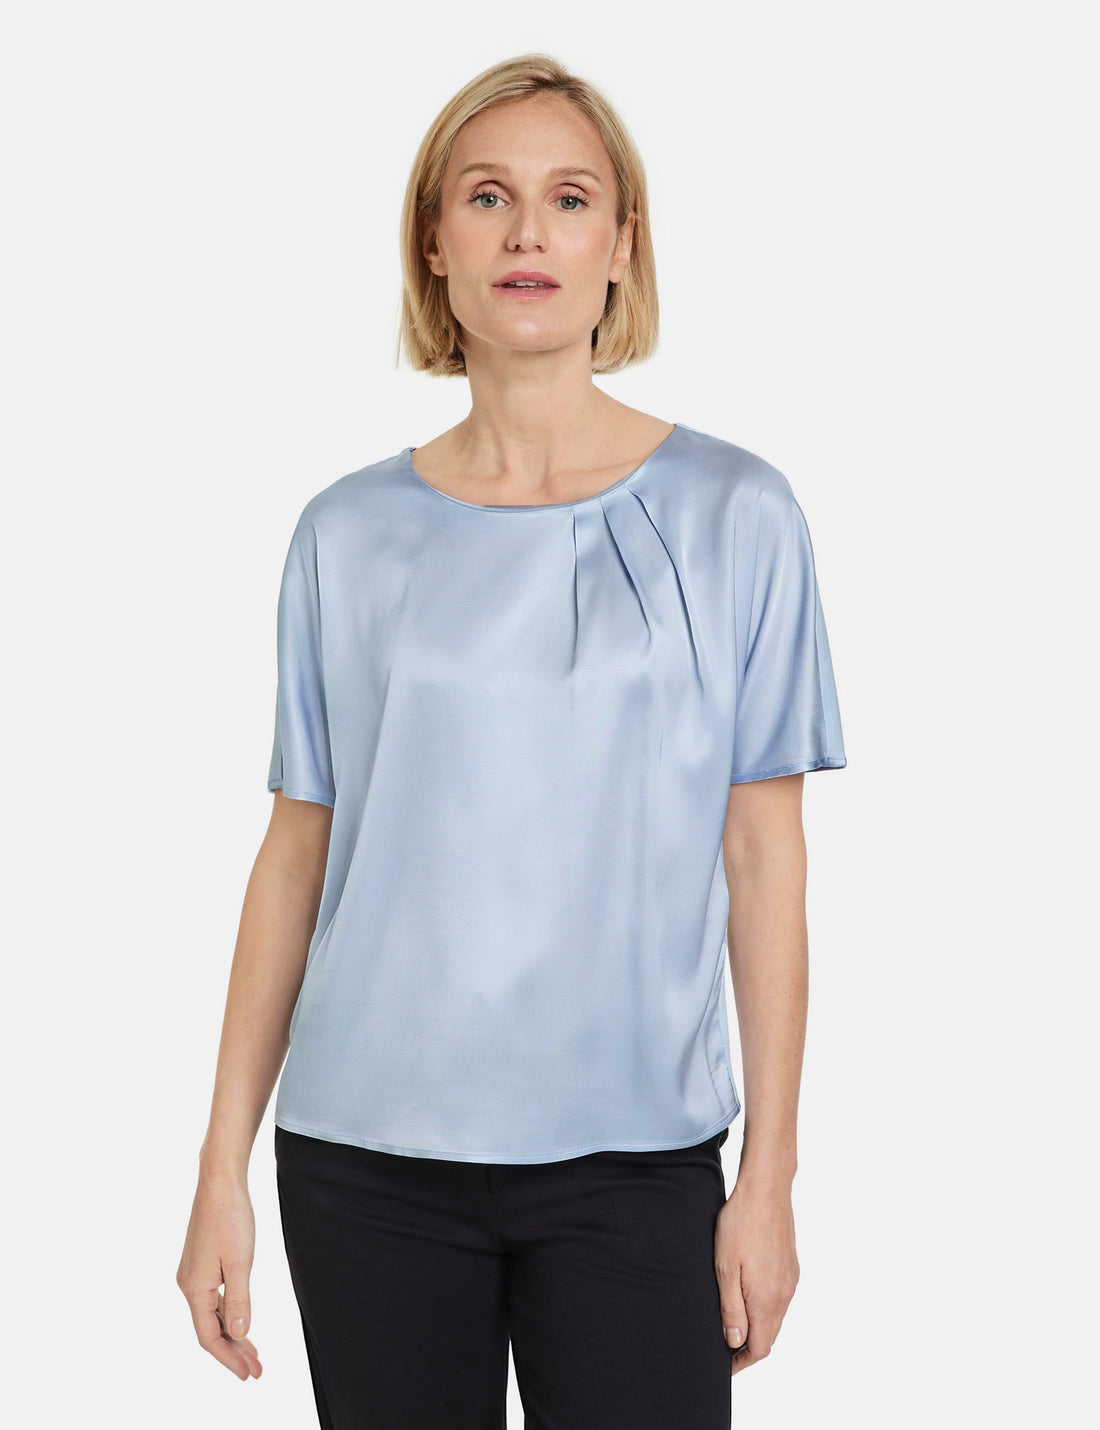 Flowing Blouse Top With Fabric Panelling_977047-35033_80935_01